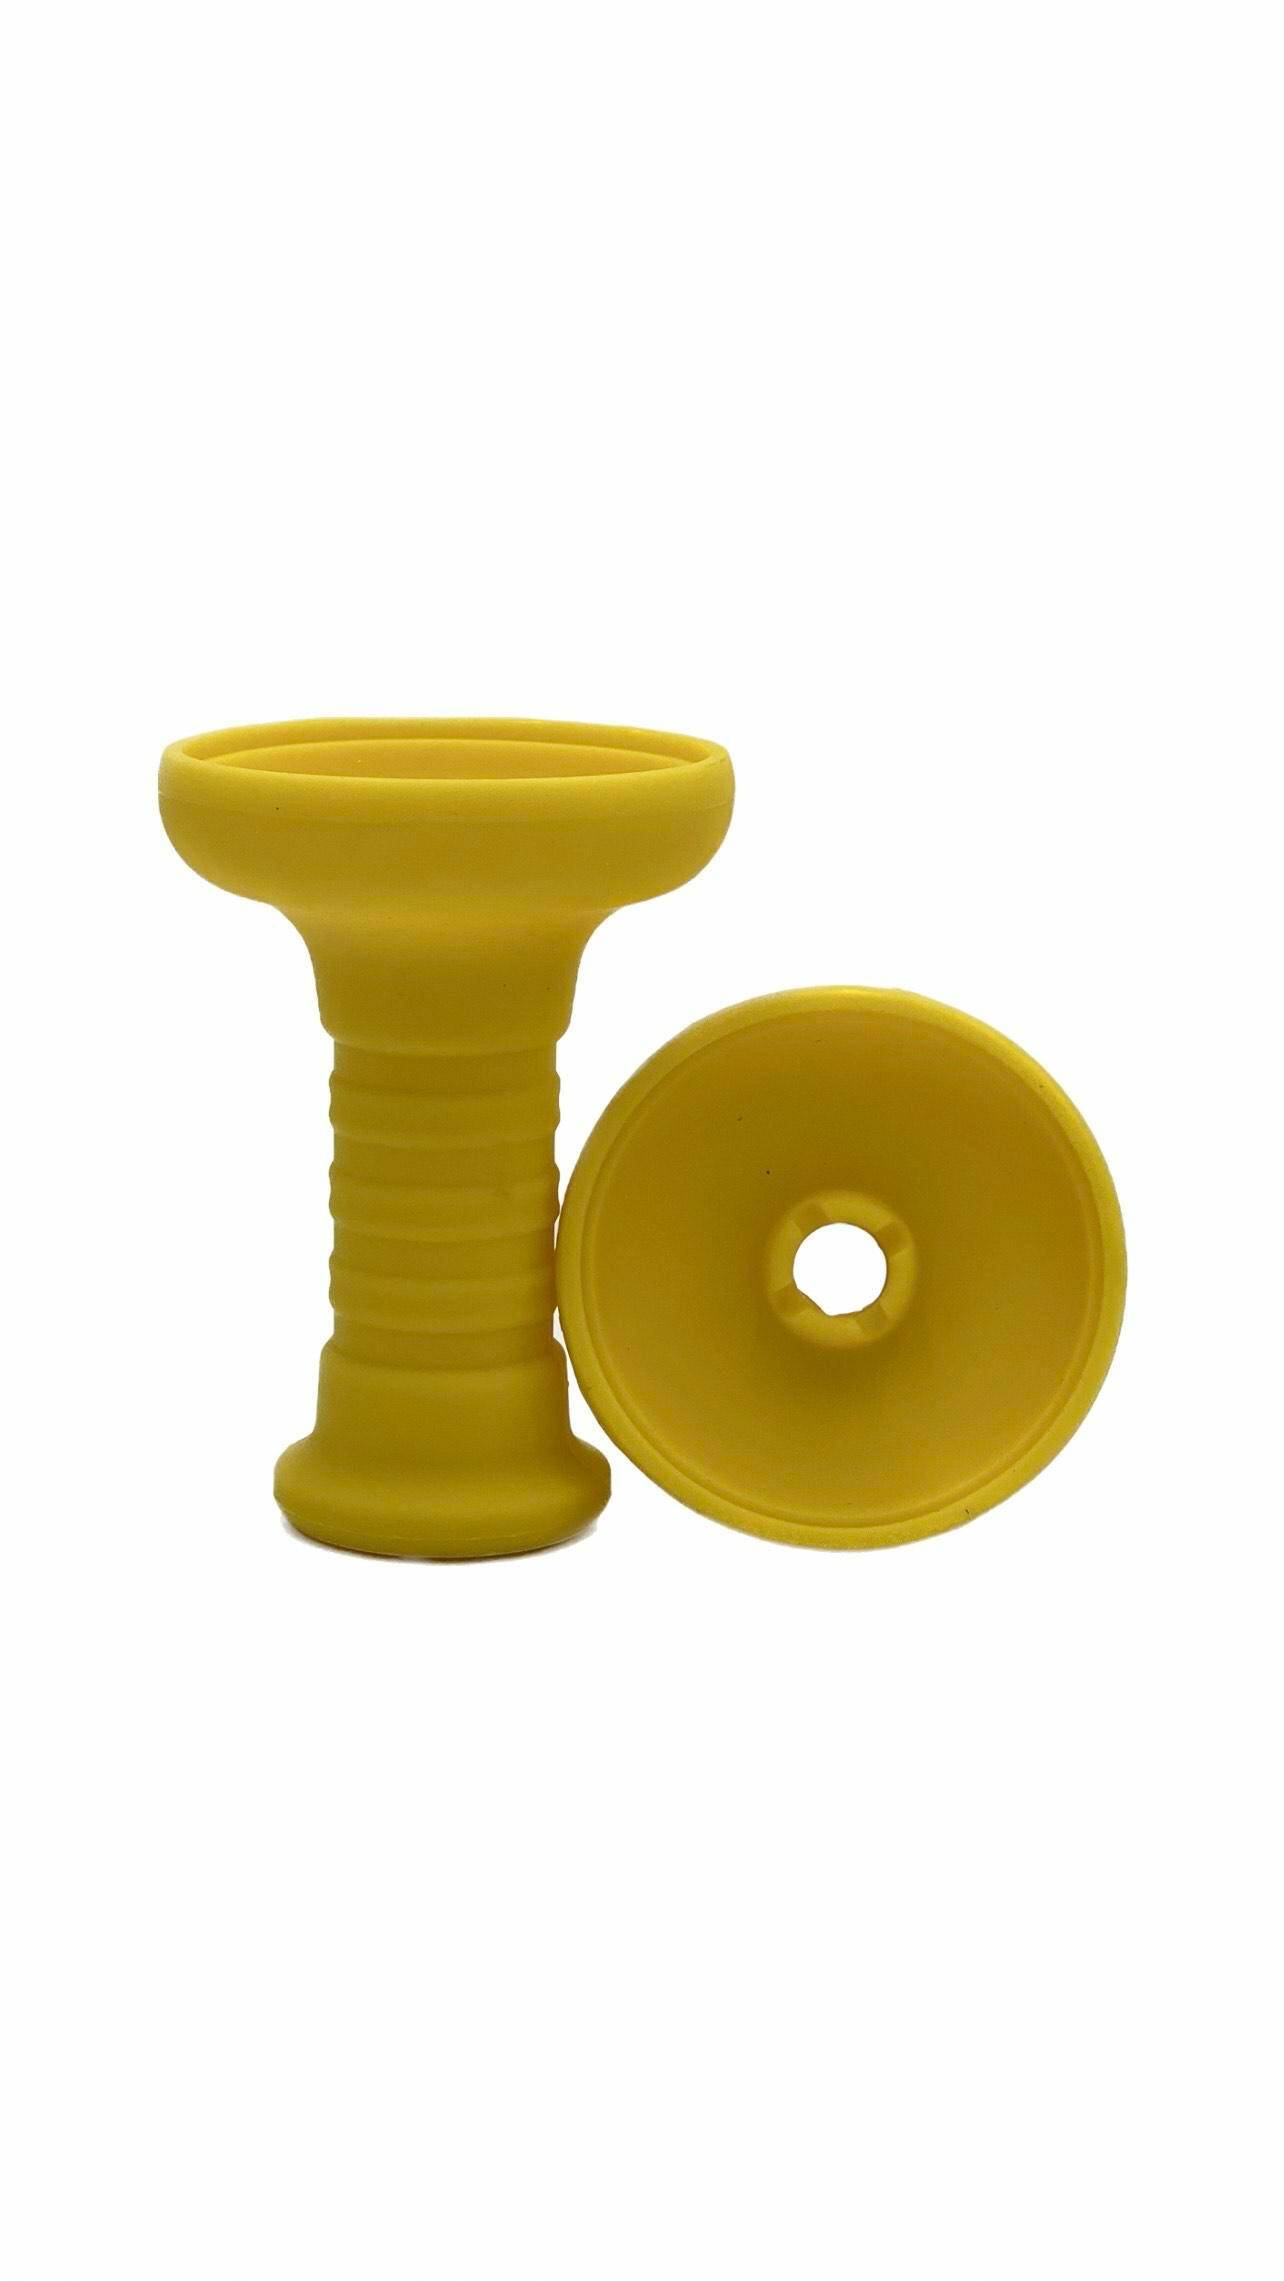 SIlicone bowl A-34 Yellow Phunnel